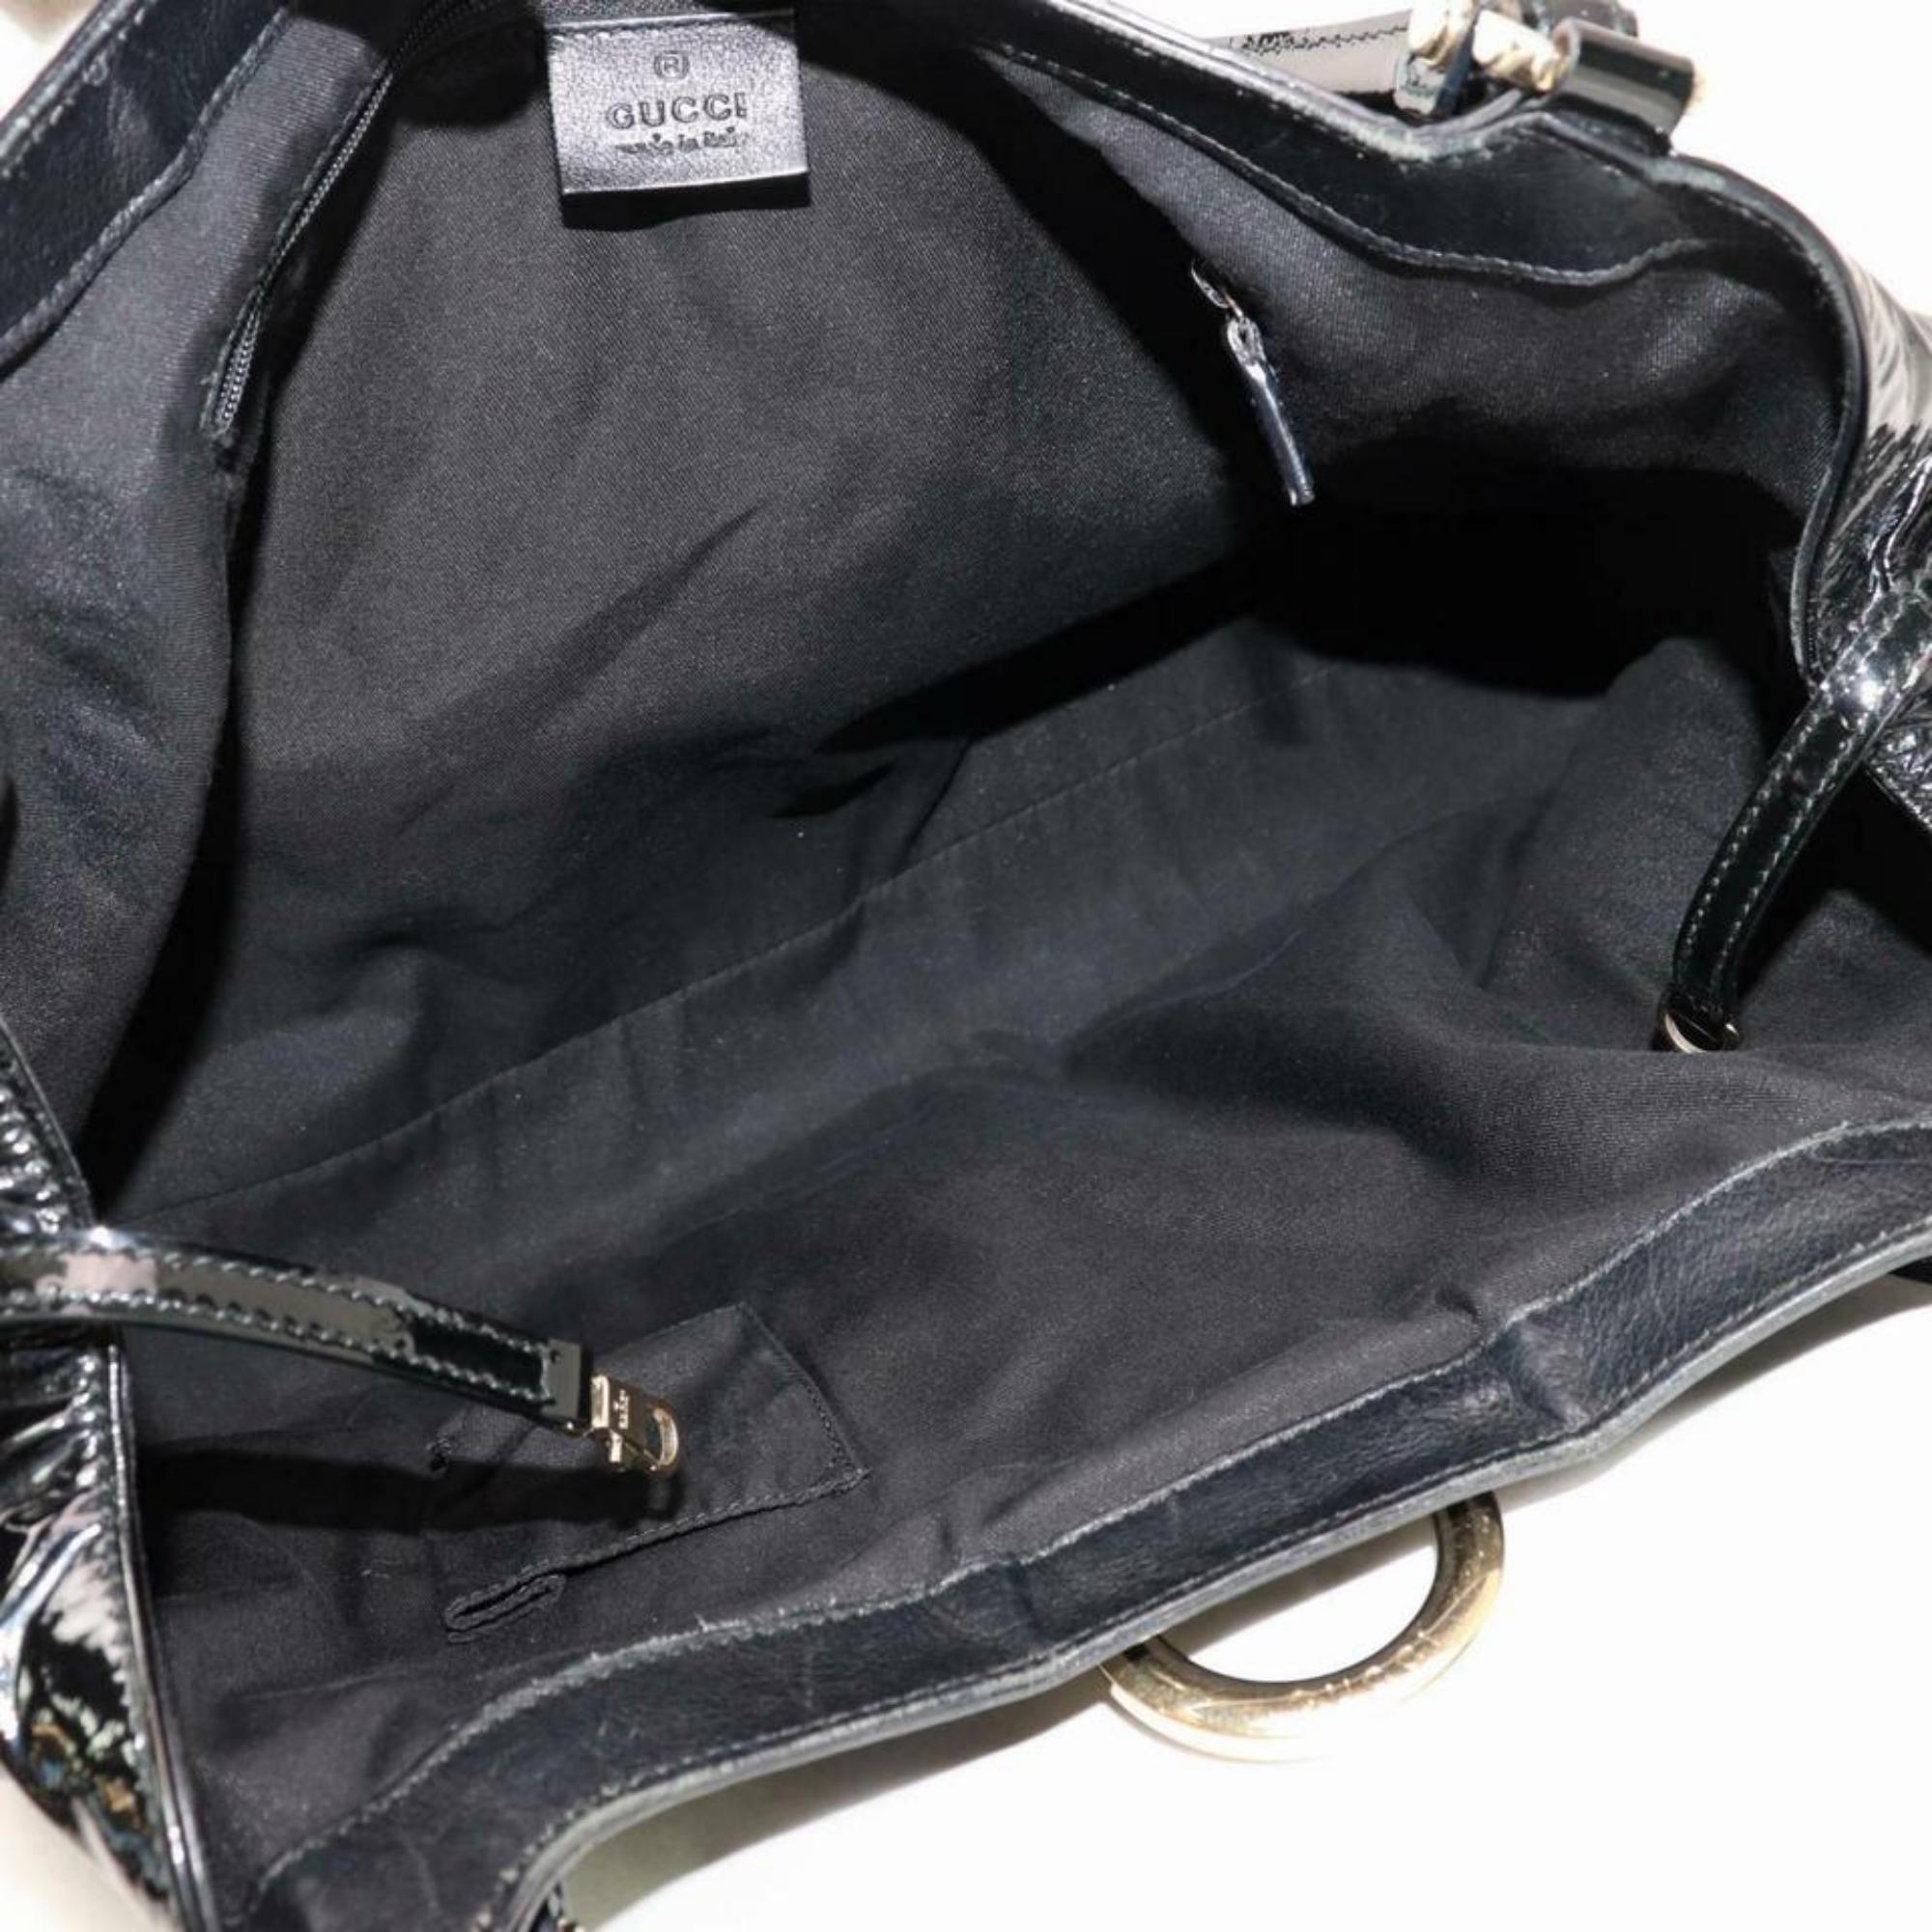 Gucci Abbey D-ring Hobo 870263 Black Patent Leather Satchel In Good Condition For Sale In Forest Hills, NY